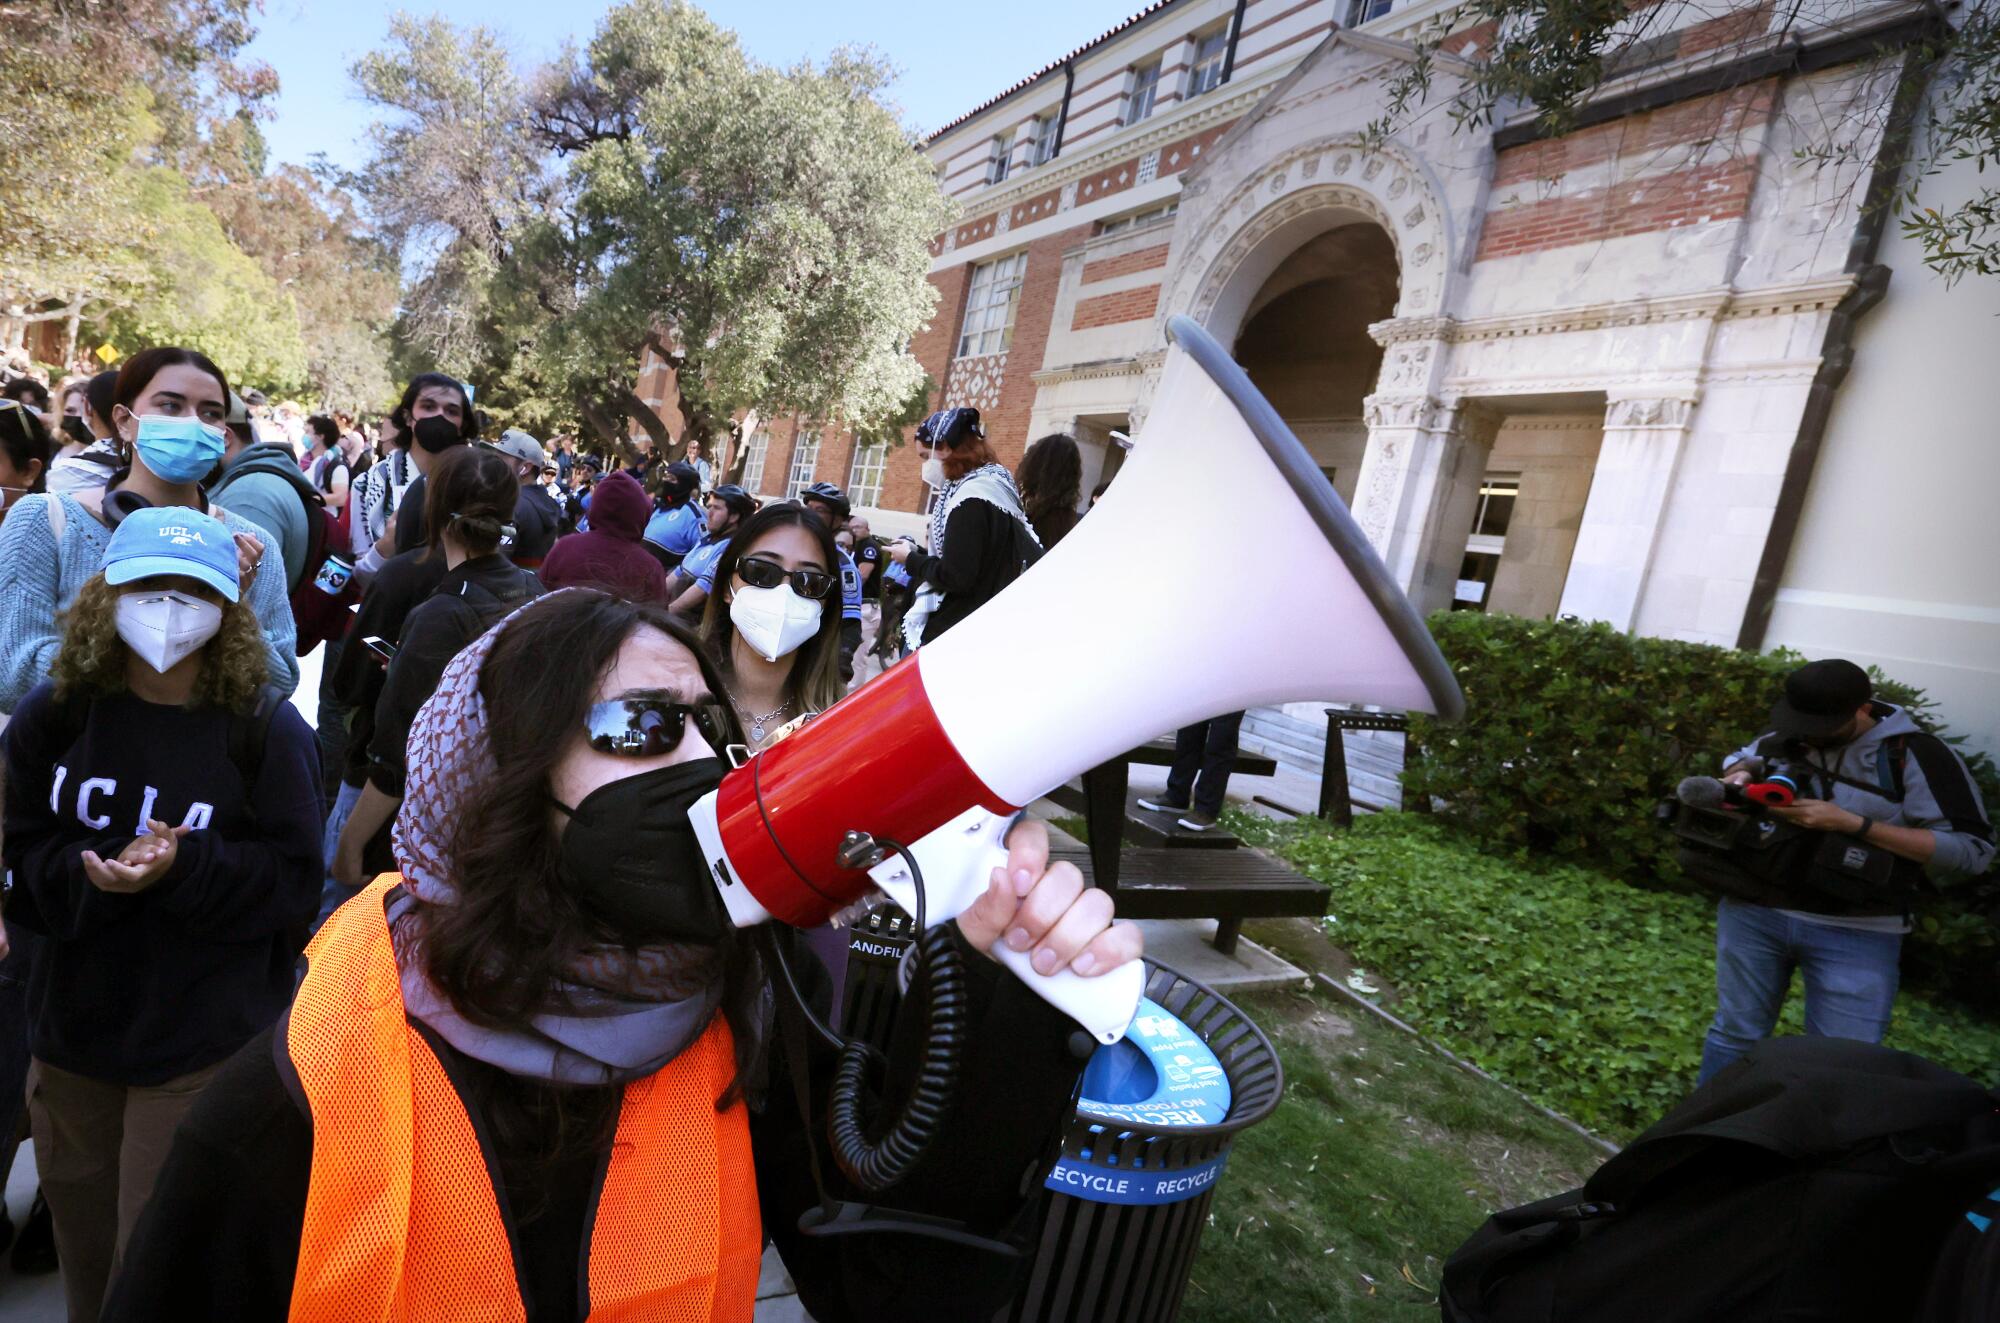 A person uses a bullhorn on UCLA campus among several other people, all in masks.